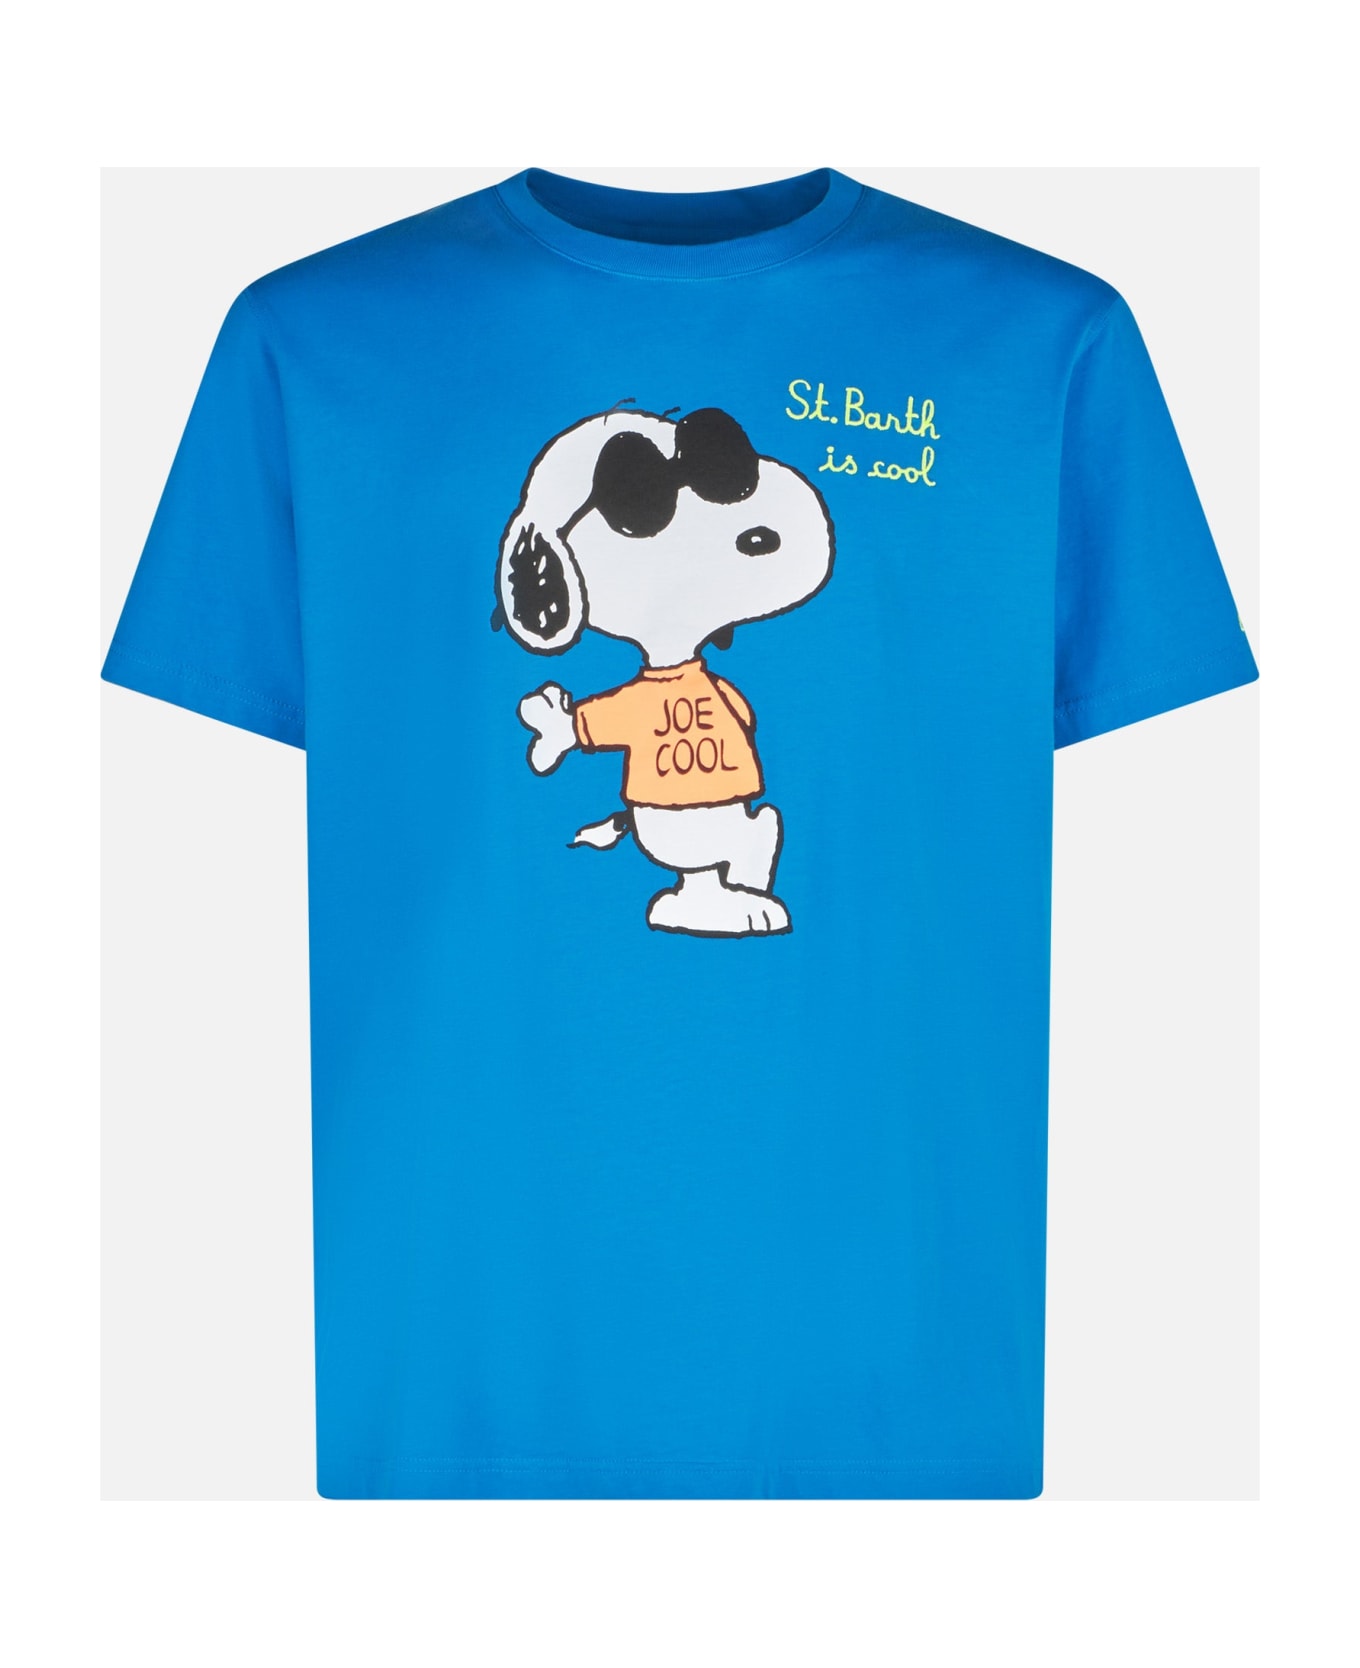 MC2 Saint Barth Man Cotton T-shirt With Snoopy Print | Snoopy - Peanuts Special Edition - BLUE シャツ